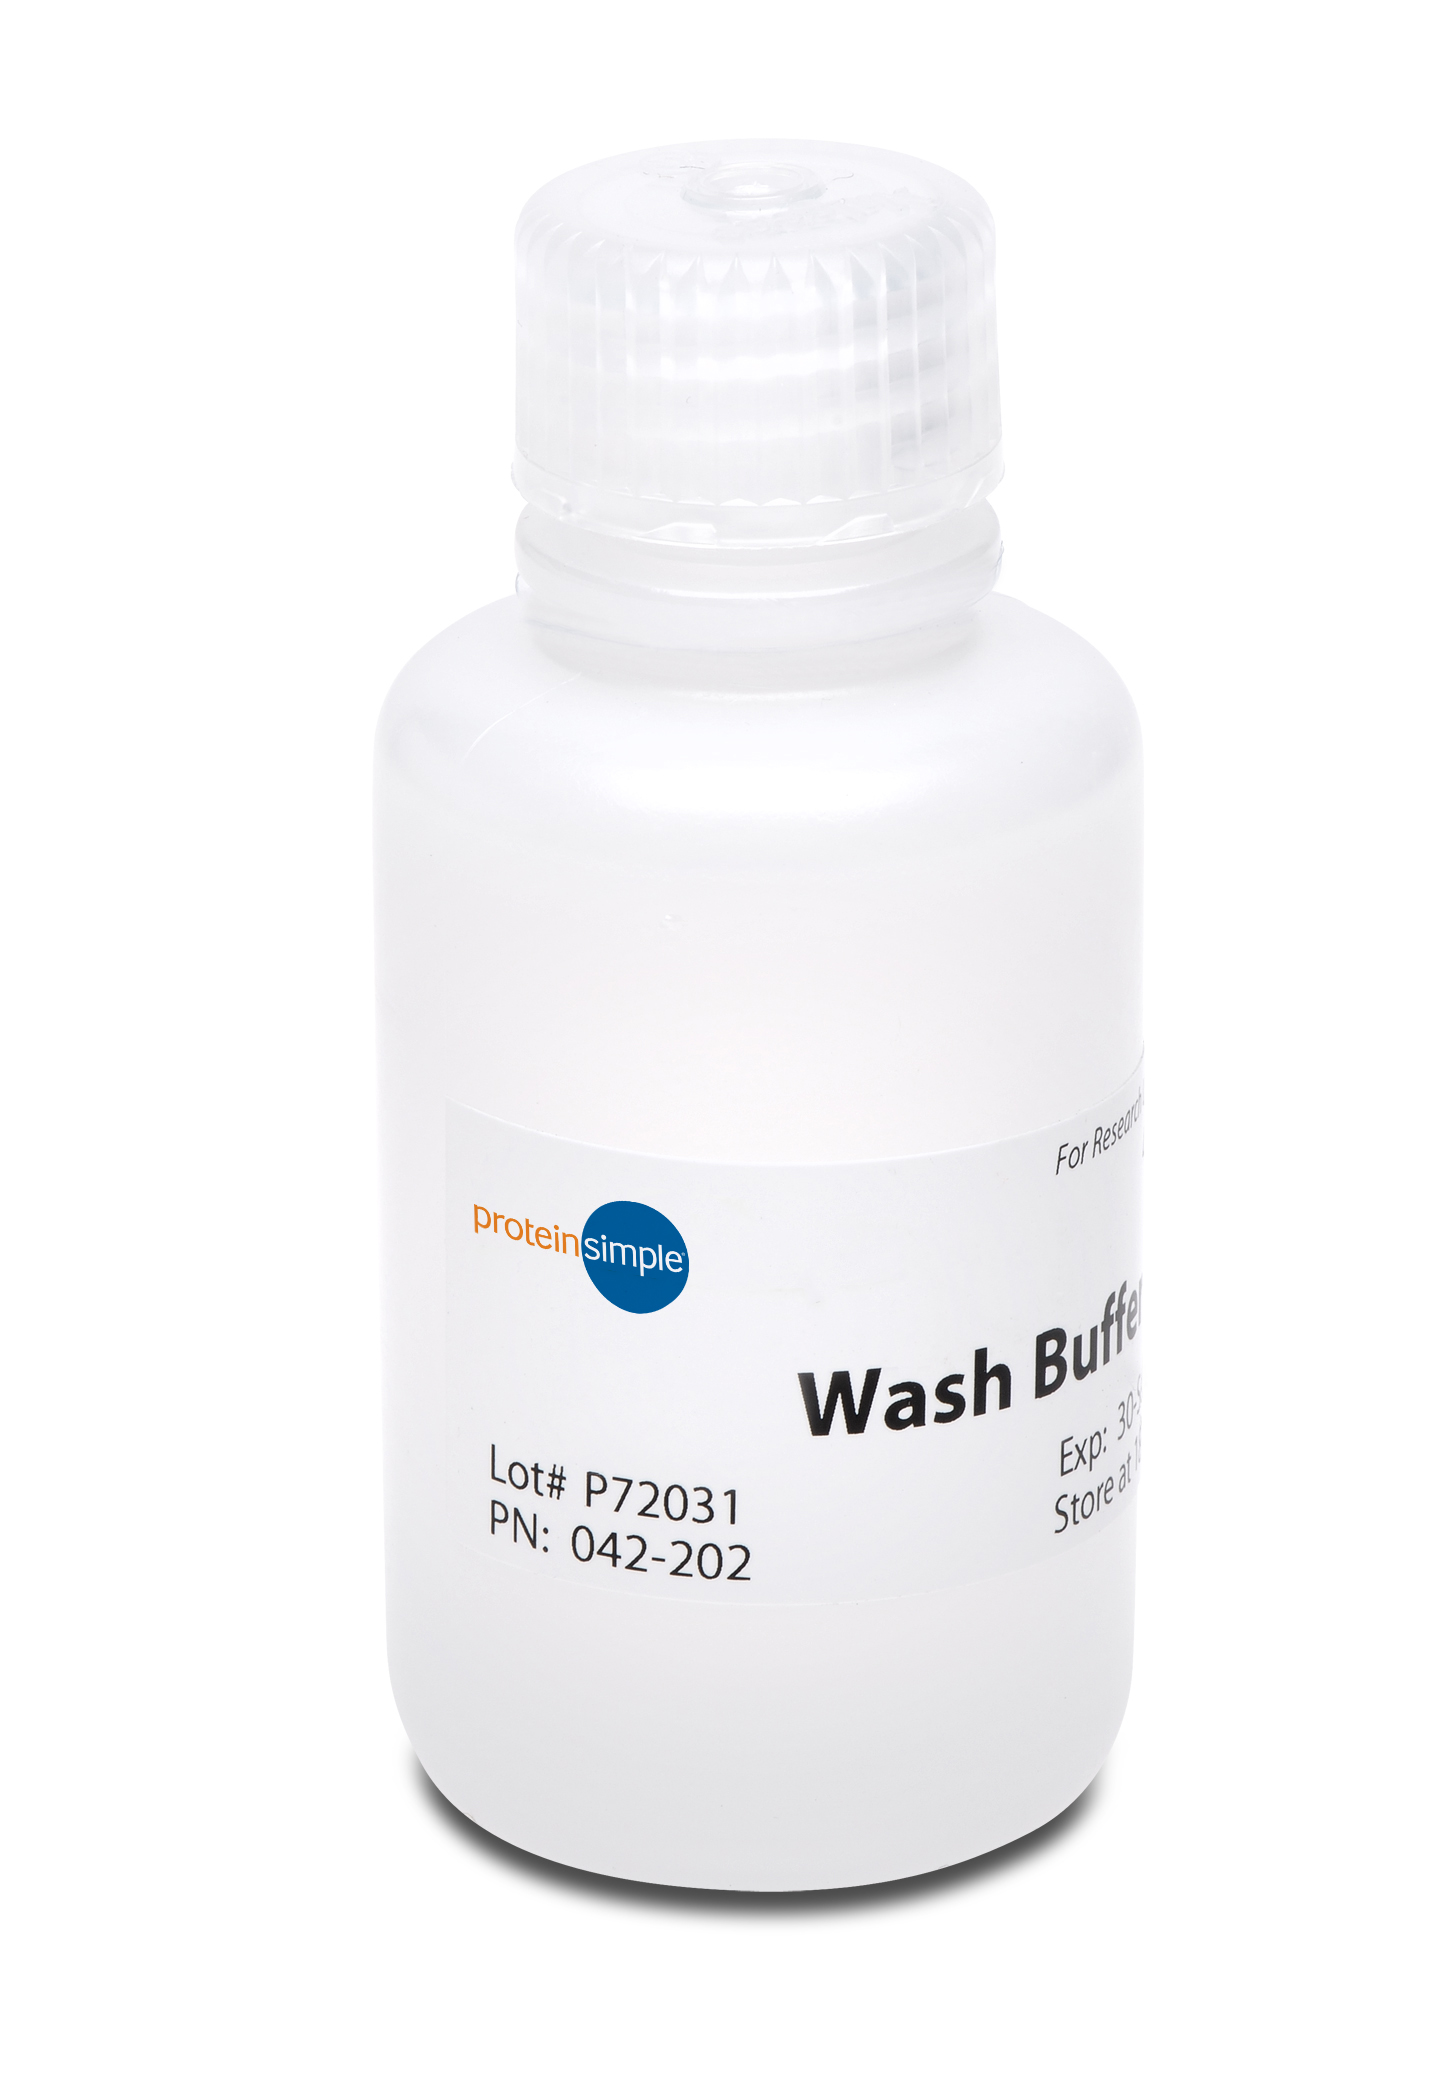 ProteinSimple Wash Buffer for Simple Western